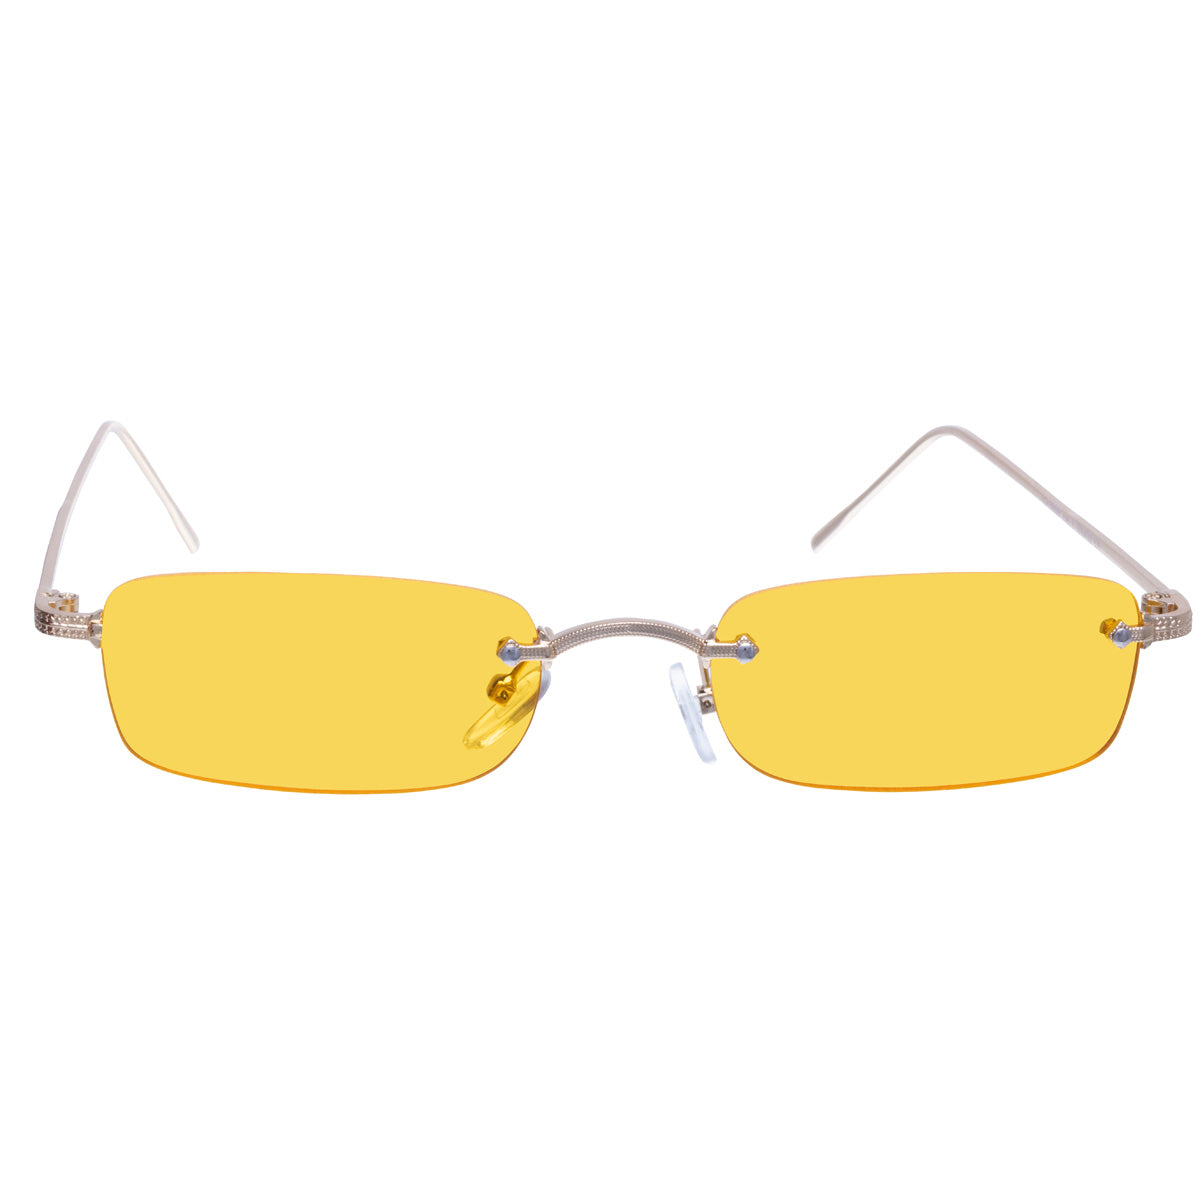 Low rectangular sunglasses without frames